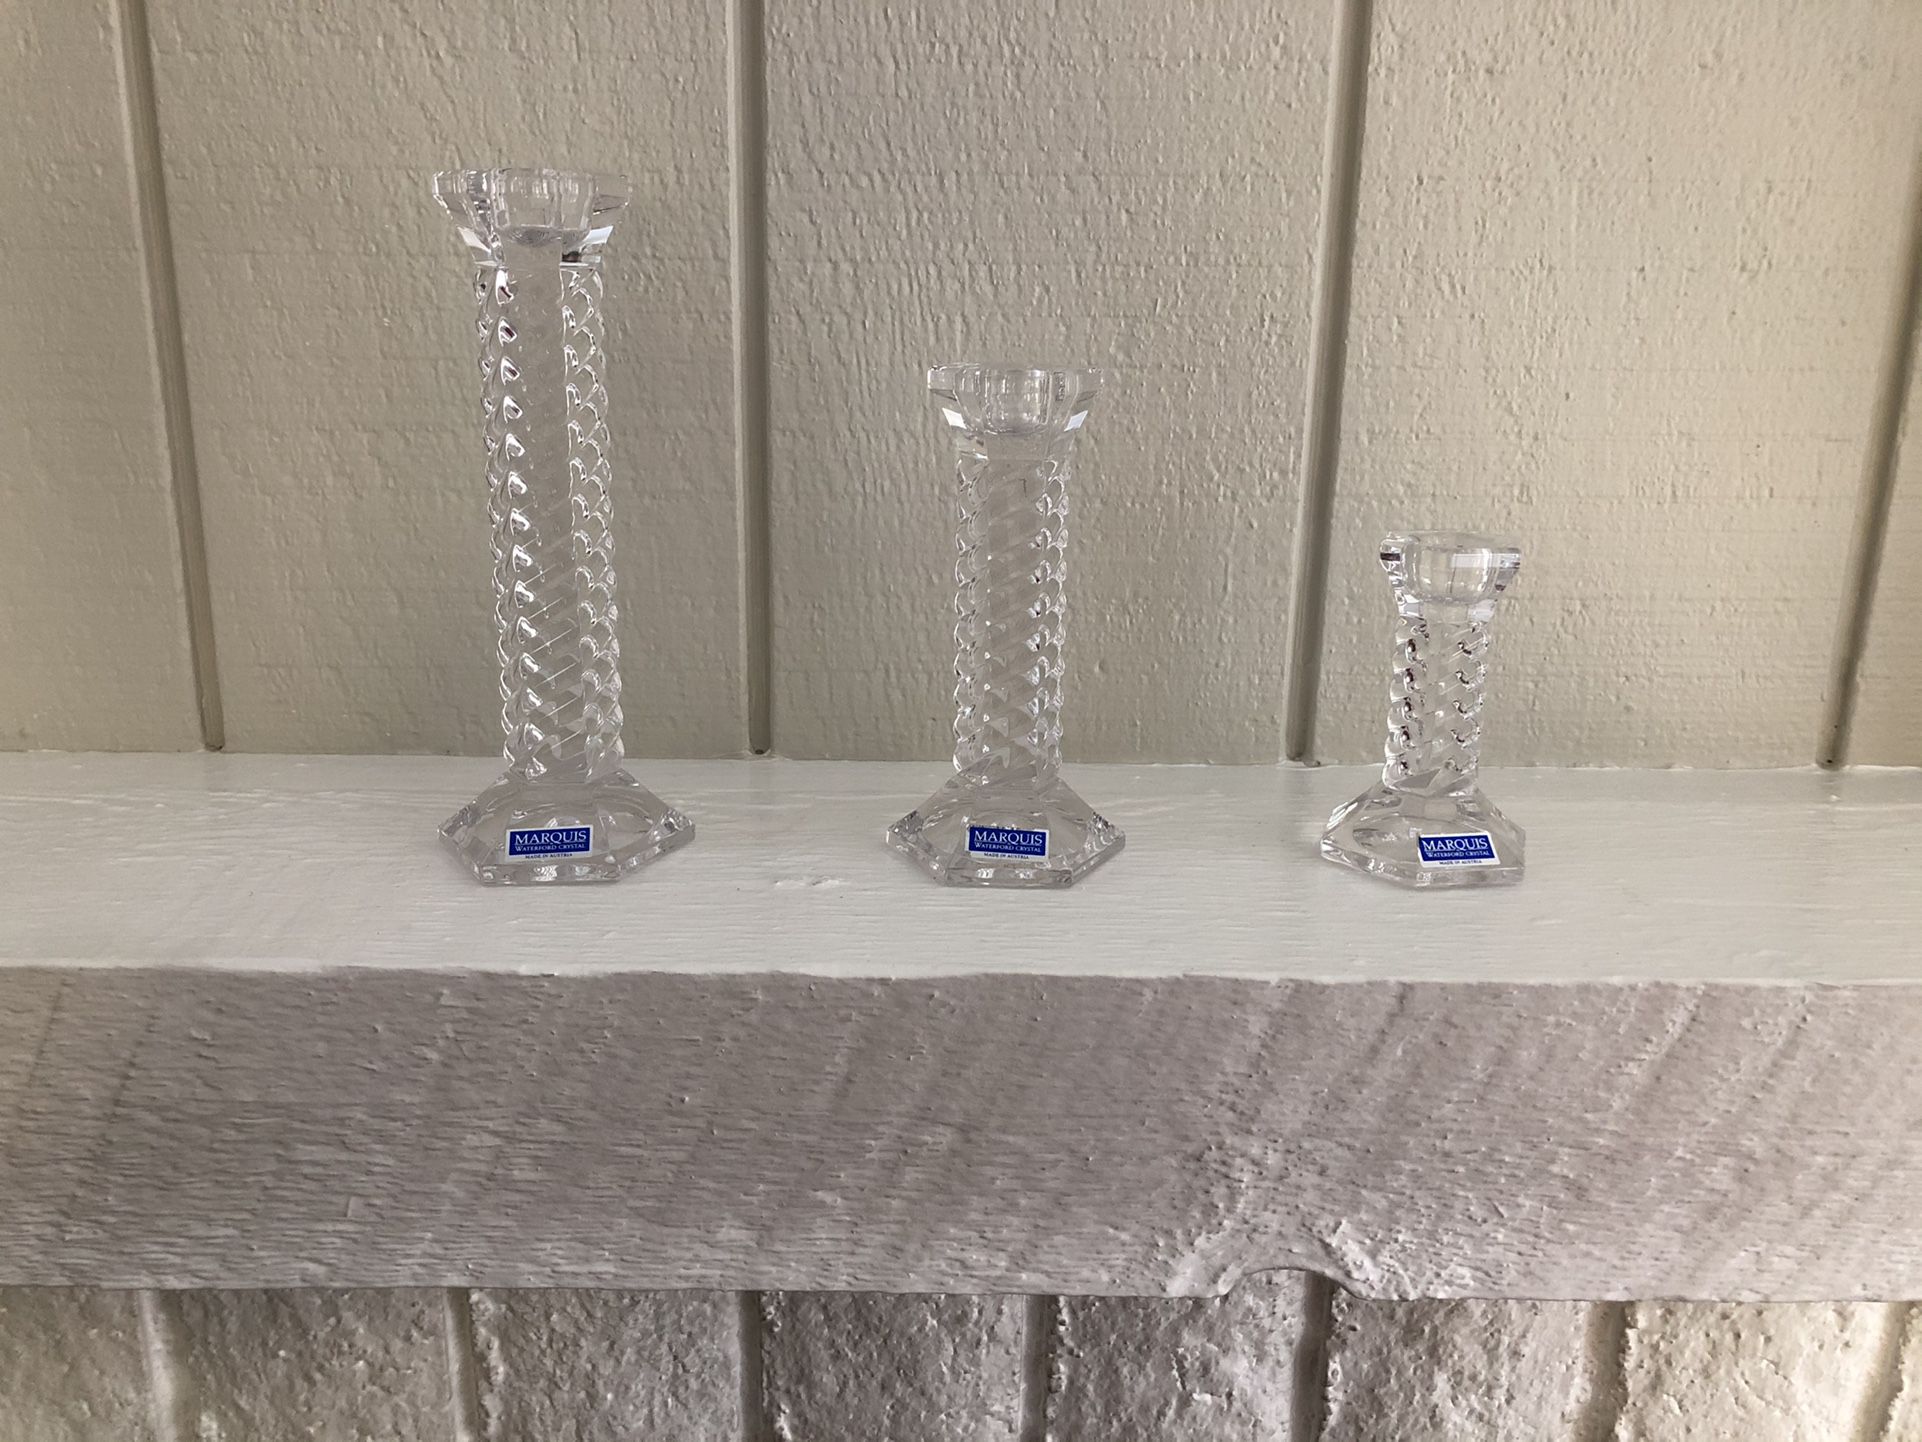 Set Of 3 Waterford Crystal Candlesticks